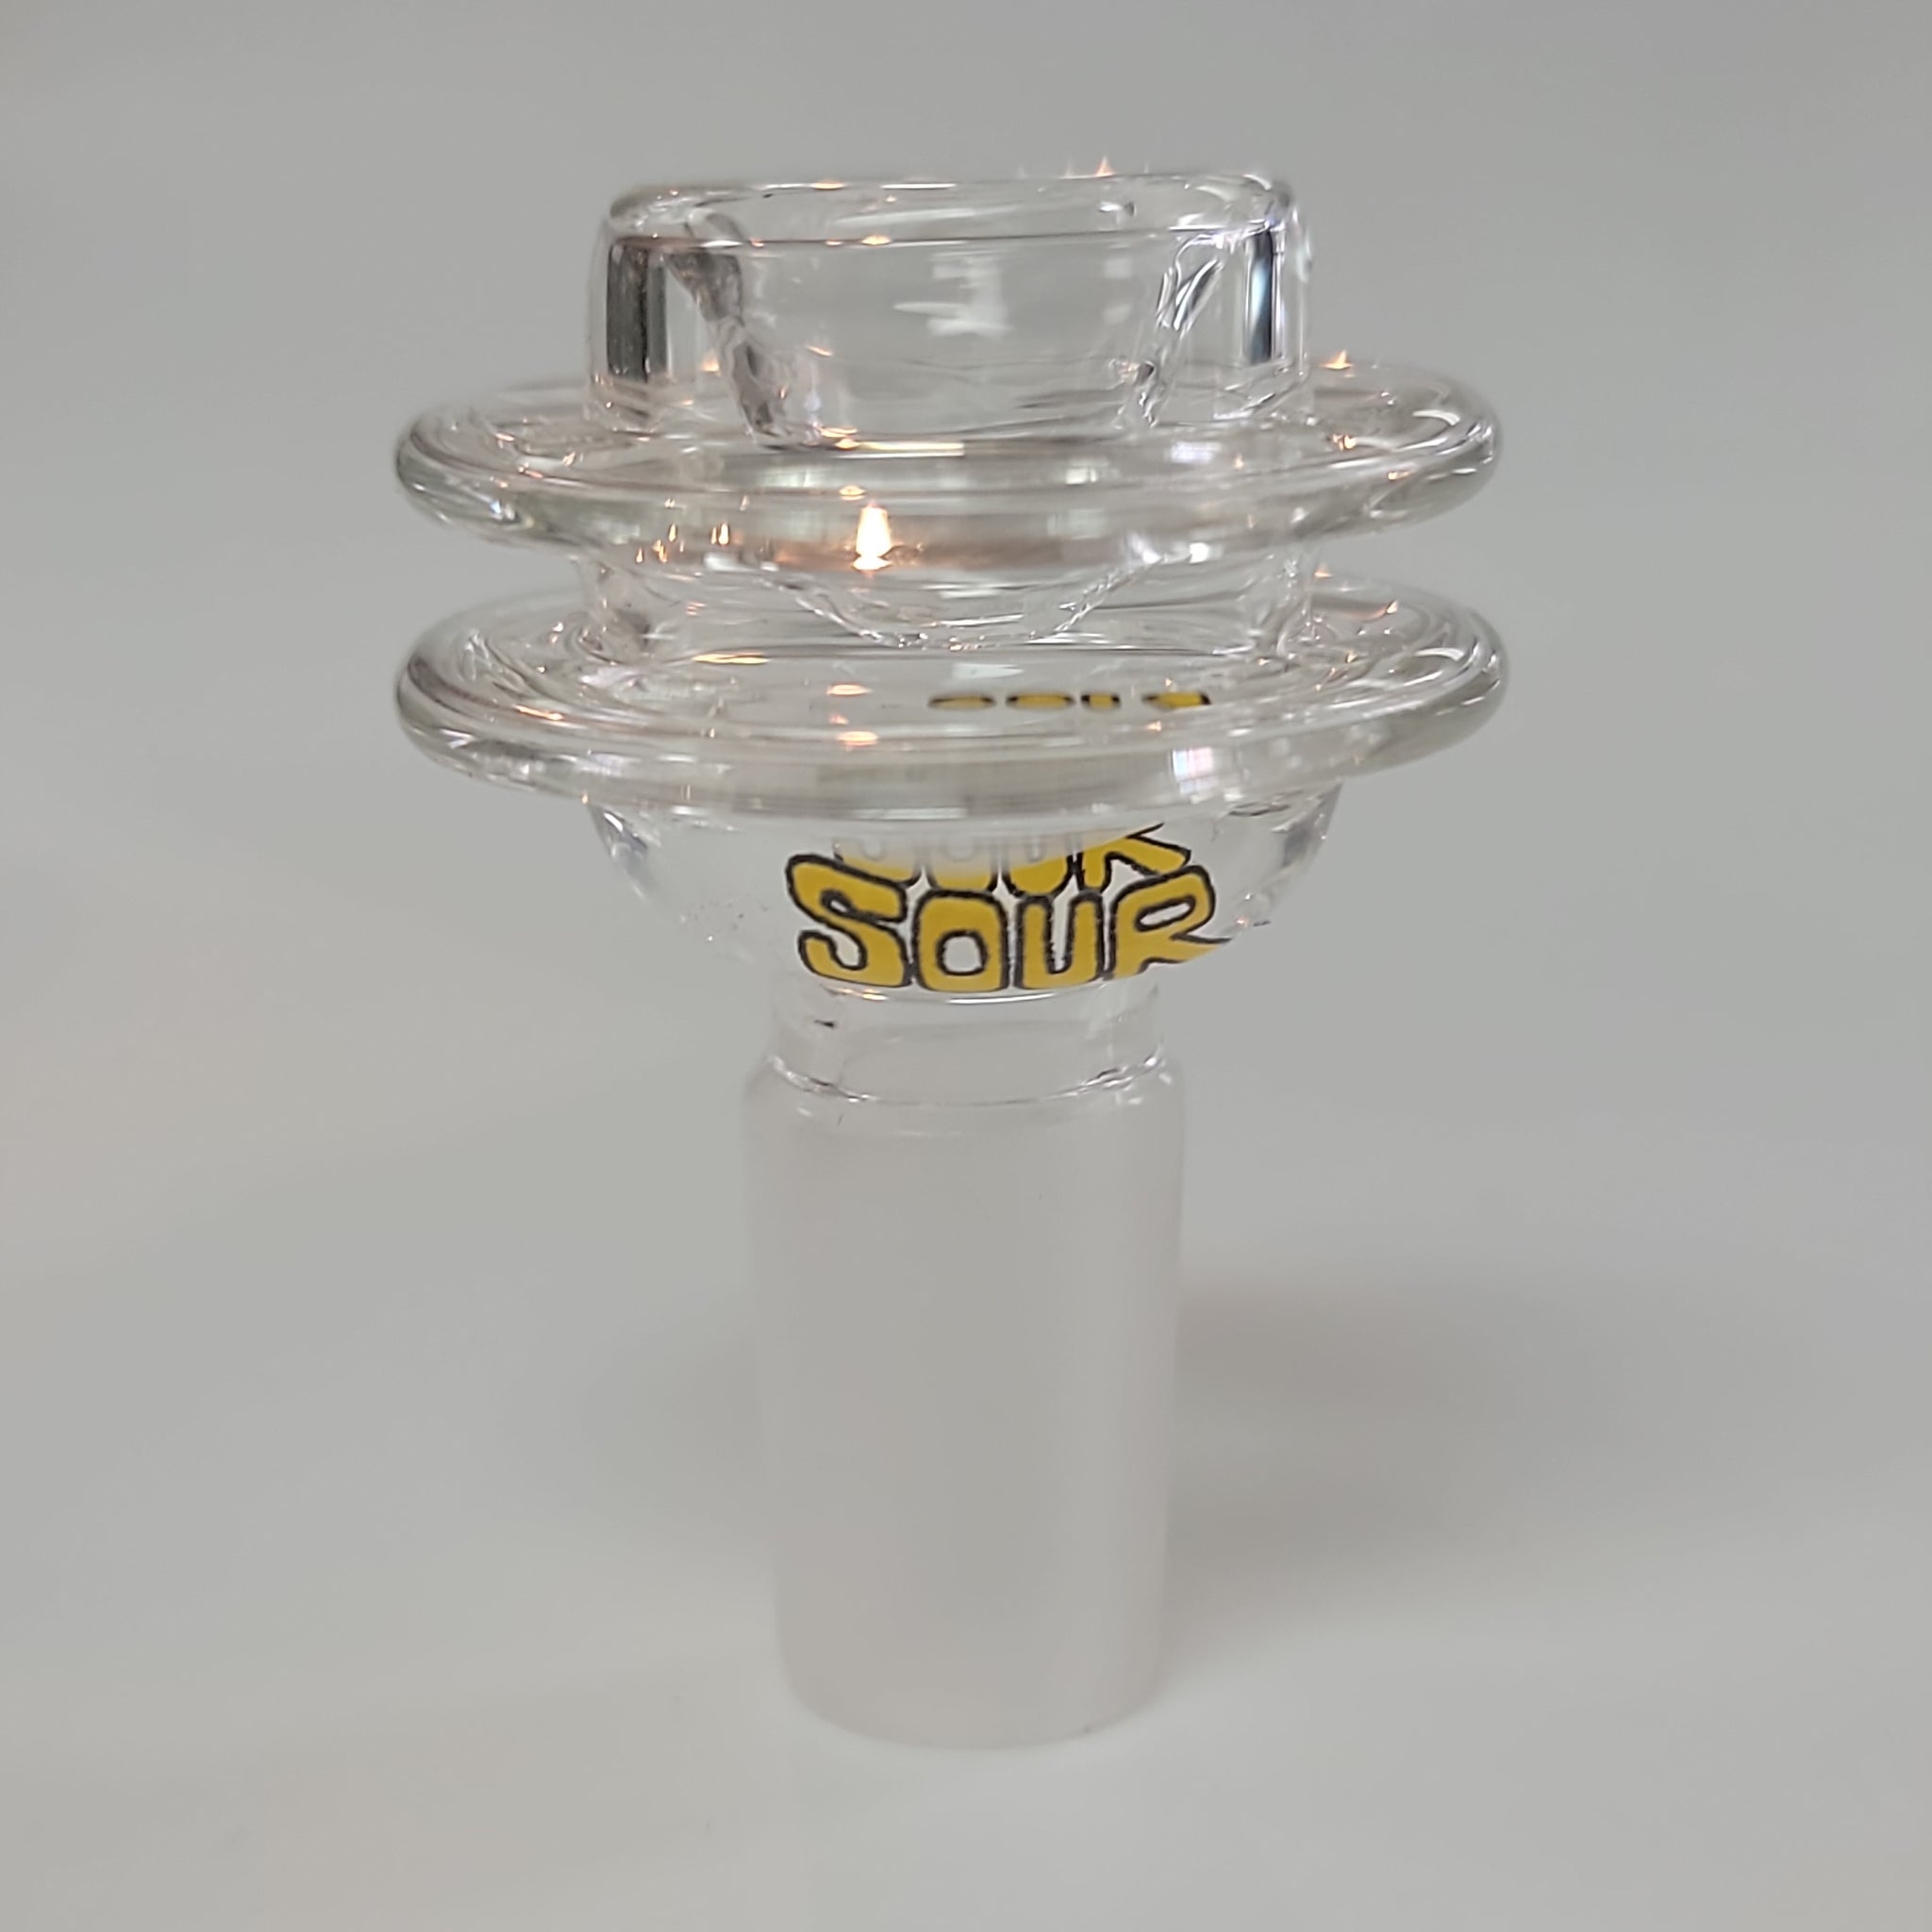 SOUR GLASS BOWL - CLEAR